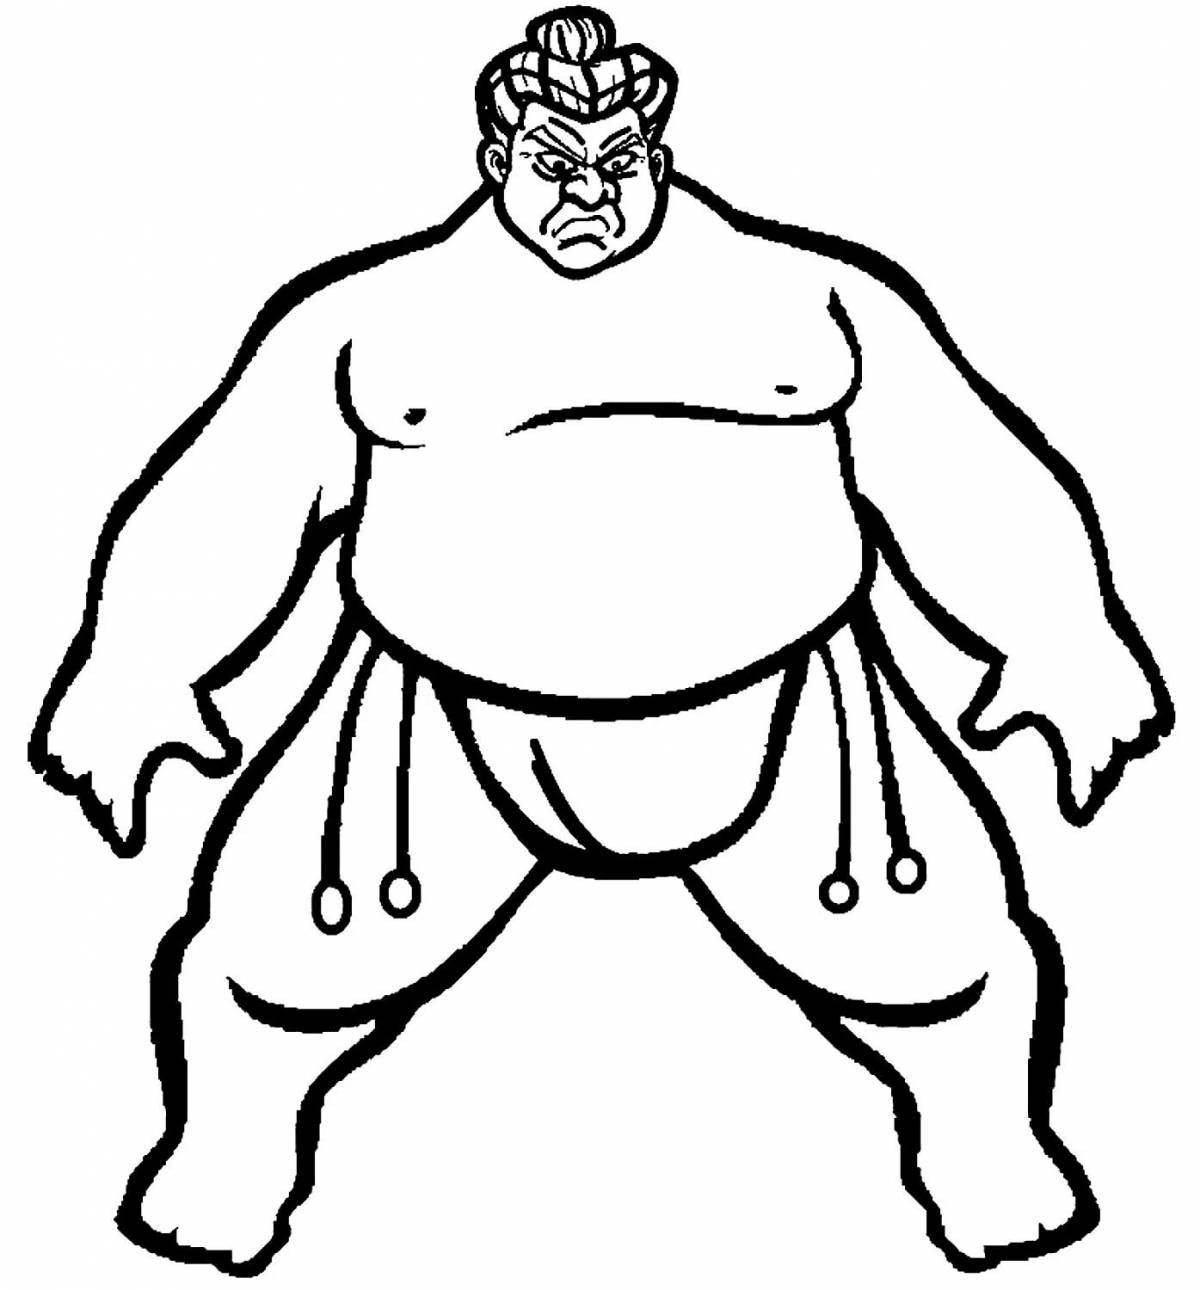 Energetic wrestler coloring pages